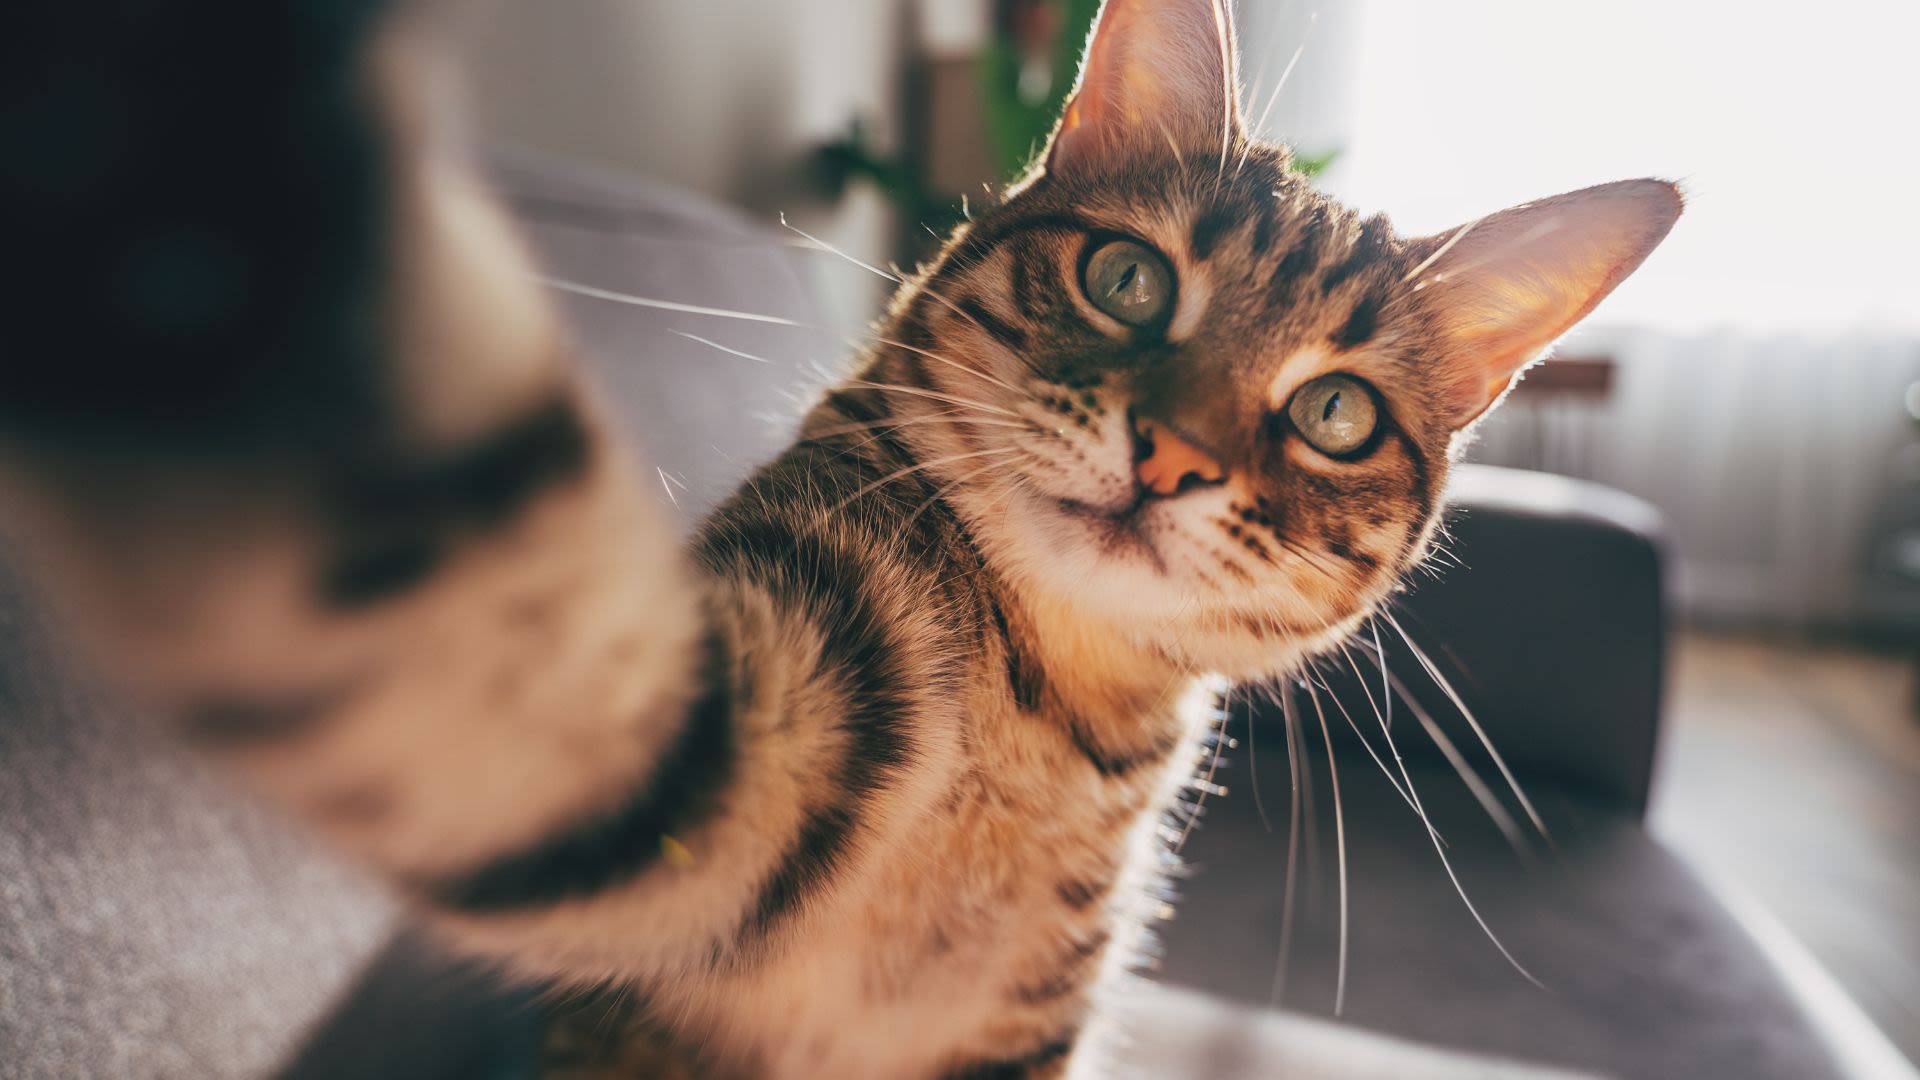 11 interesting cat facts you're bound to find a-meow-sing